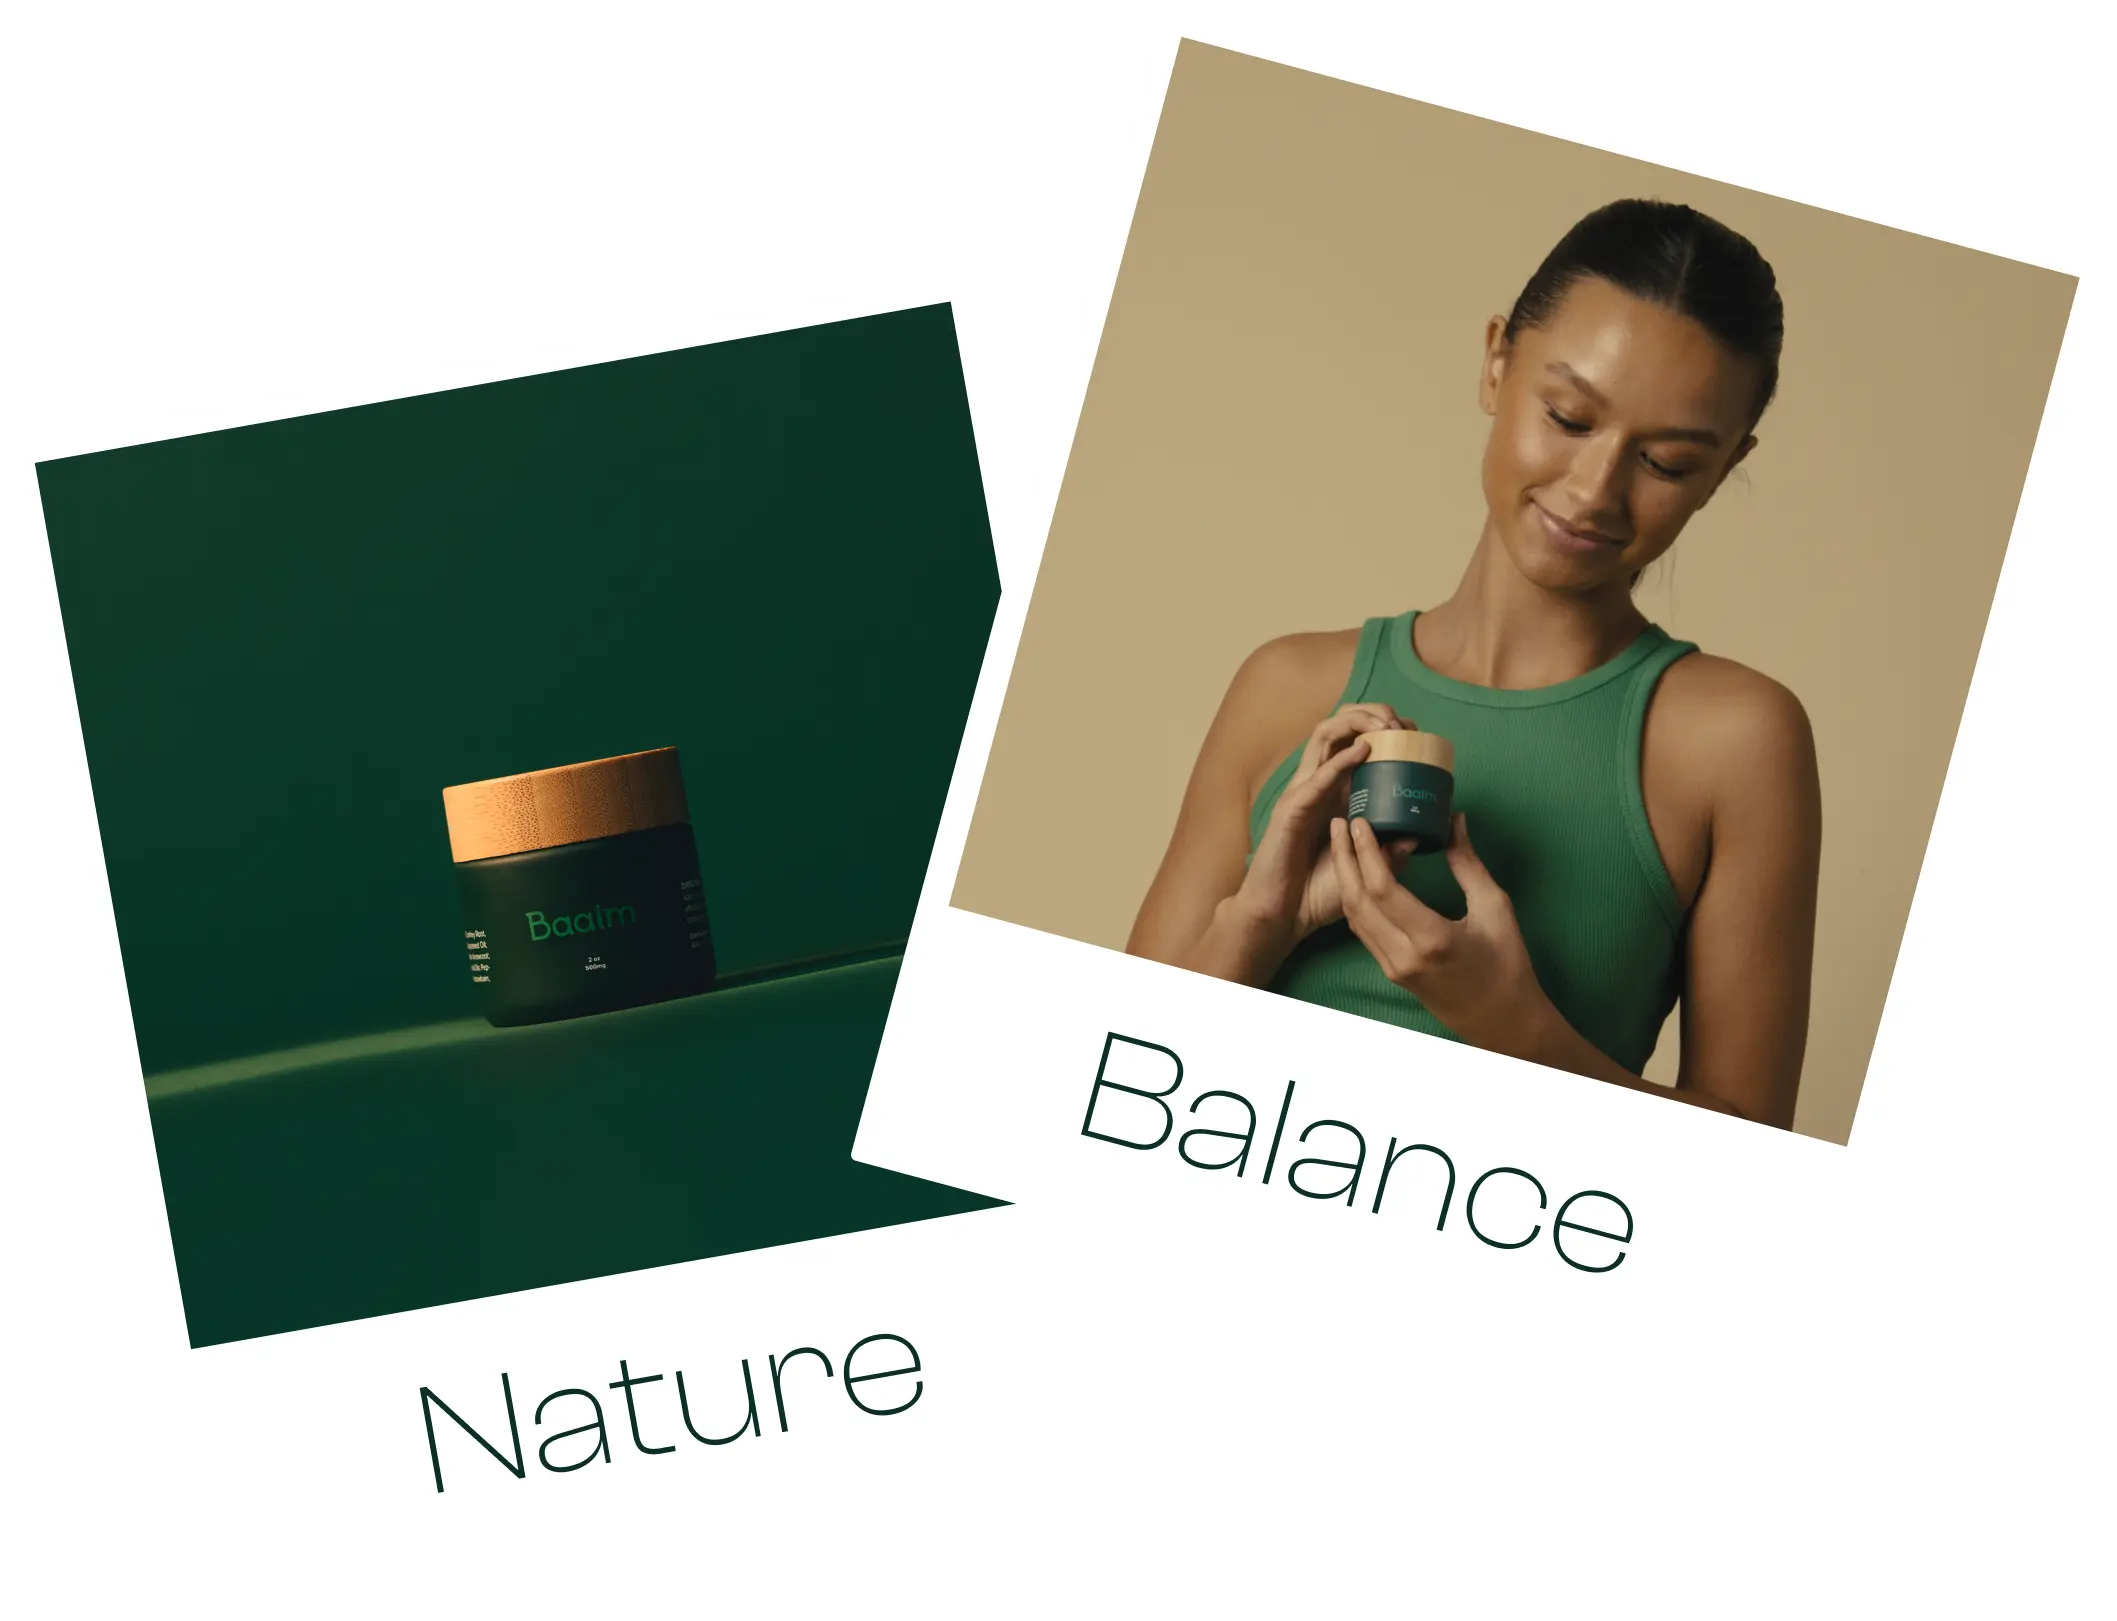 Two diagonally-offset images: one Baalm with dark cinemagraphic lighting and "Nature" written beneath, and the other a young woman in yoga clothes smiling with "Balance" written beneath.